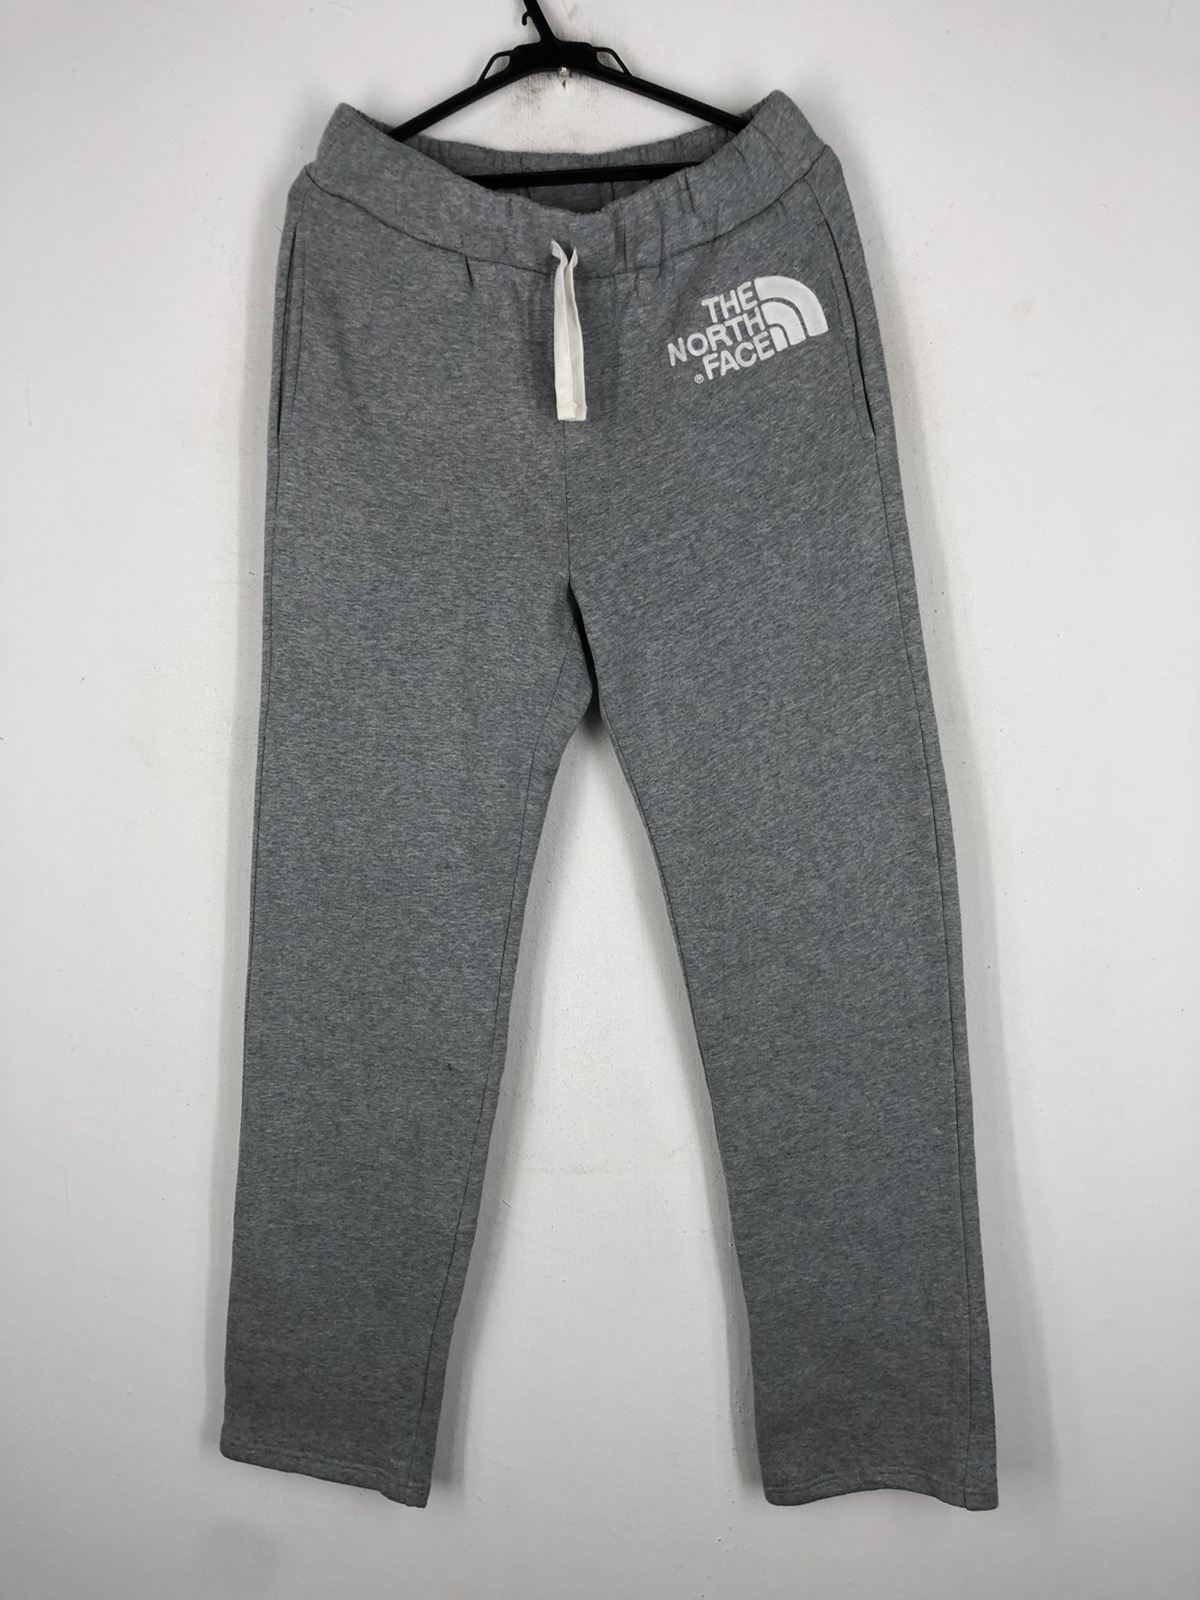 THE NORTH FACE SWEATPANTS - 1